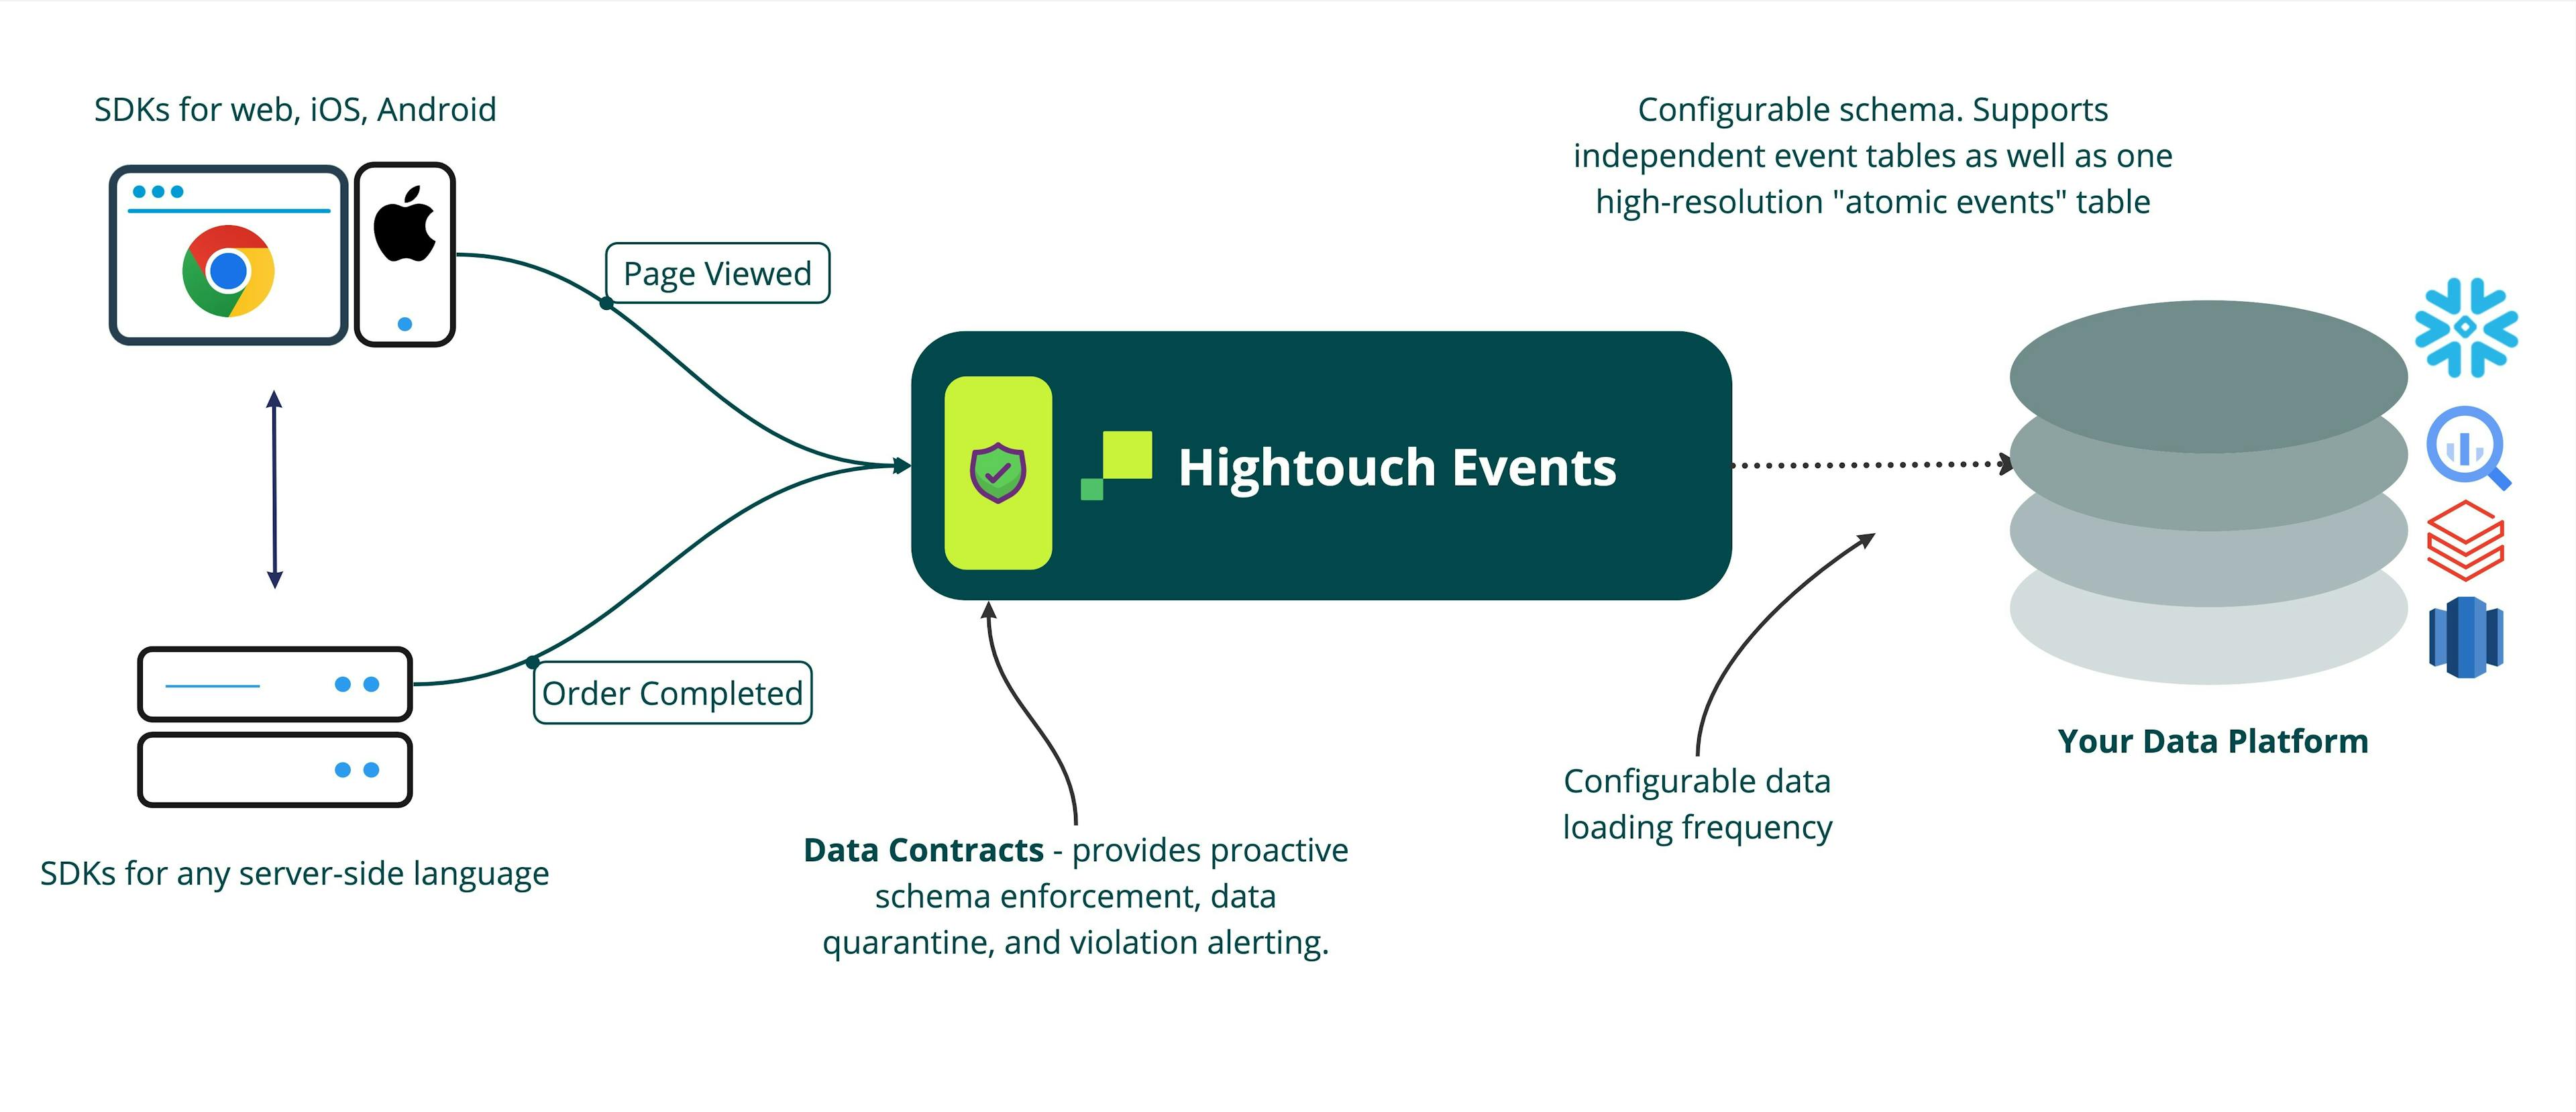 Hightouch Events diagram showing the whole process of event tracking